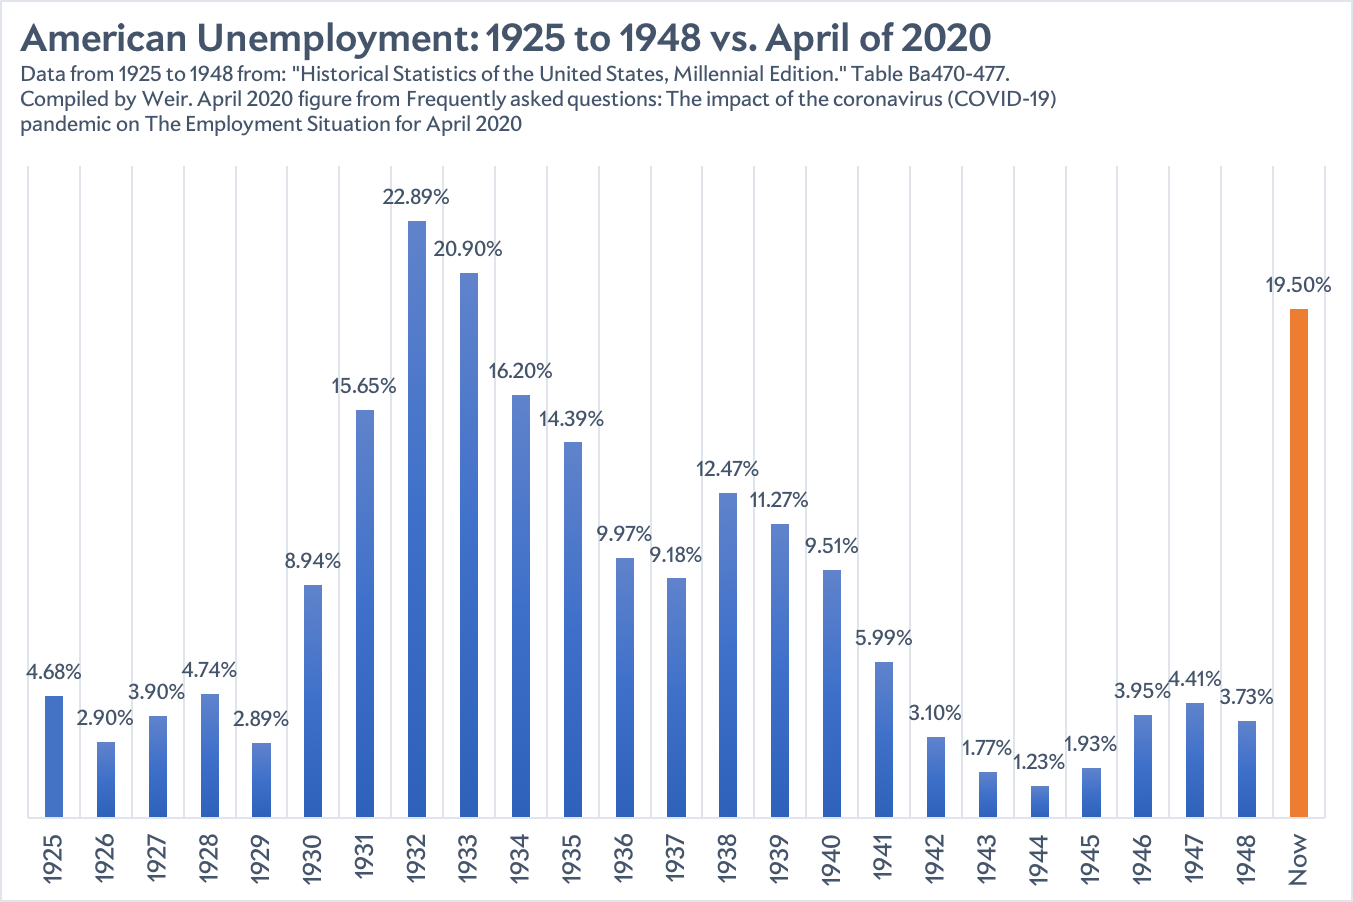 A bar graph showing the unemployment rate from 1925–48 and the rate in April 2020.